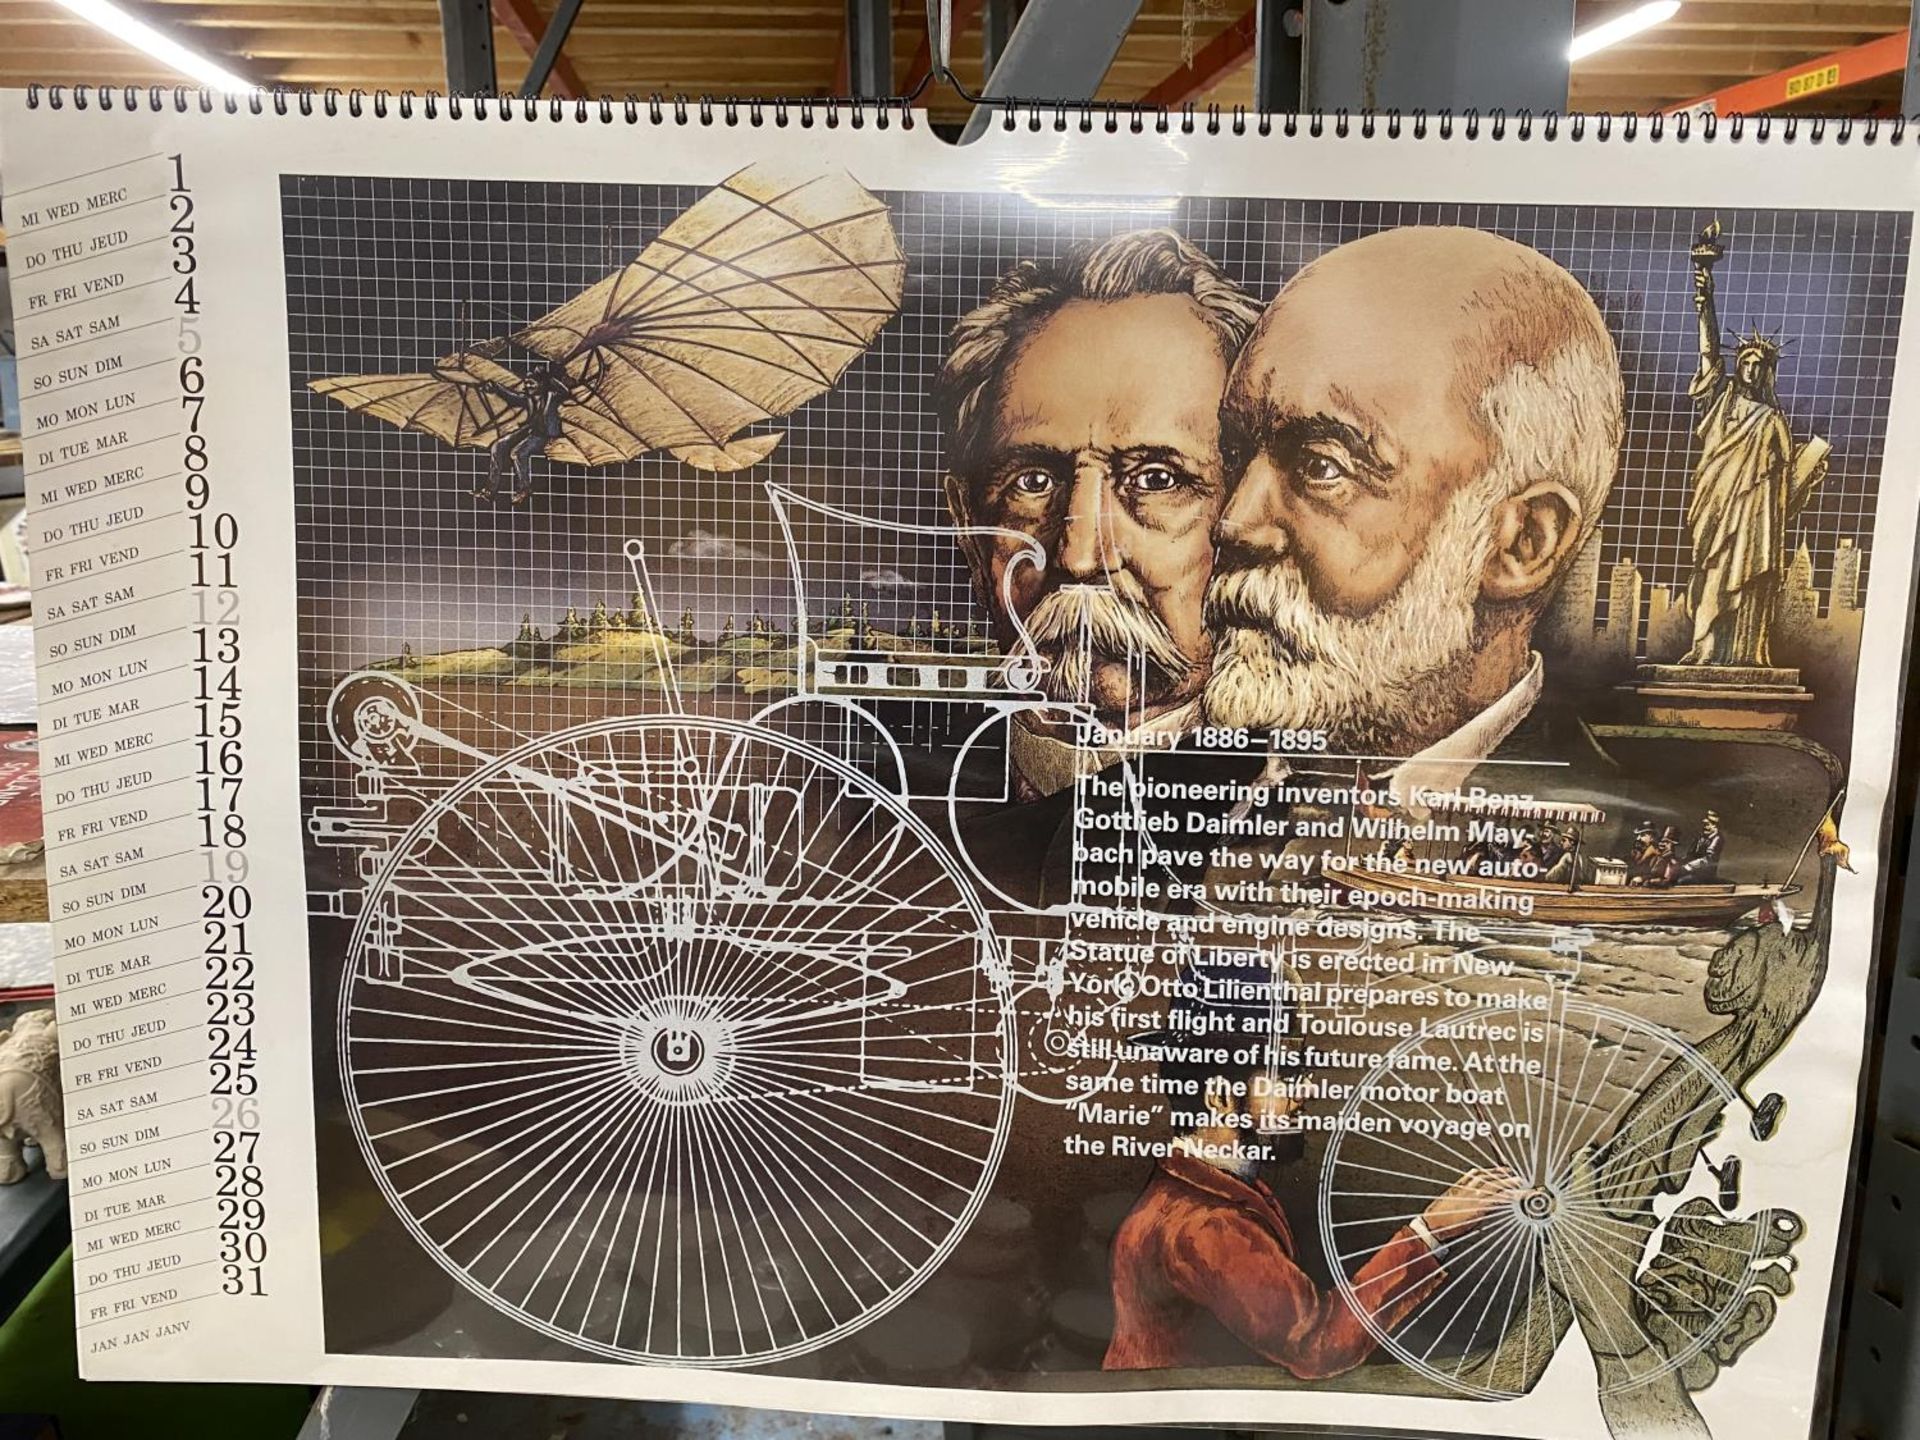 A CALENDER TO MARK 100 YEARS OF MERCEDEZ BENZ, CONTAINING FACTS ABOUT ITS BIRTH AND HISTORY 1886-